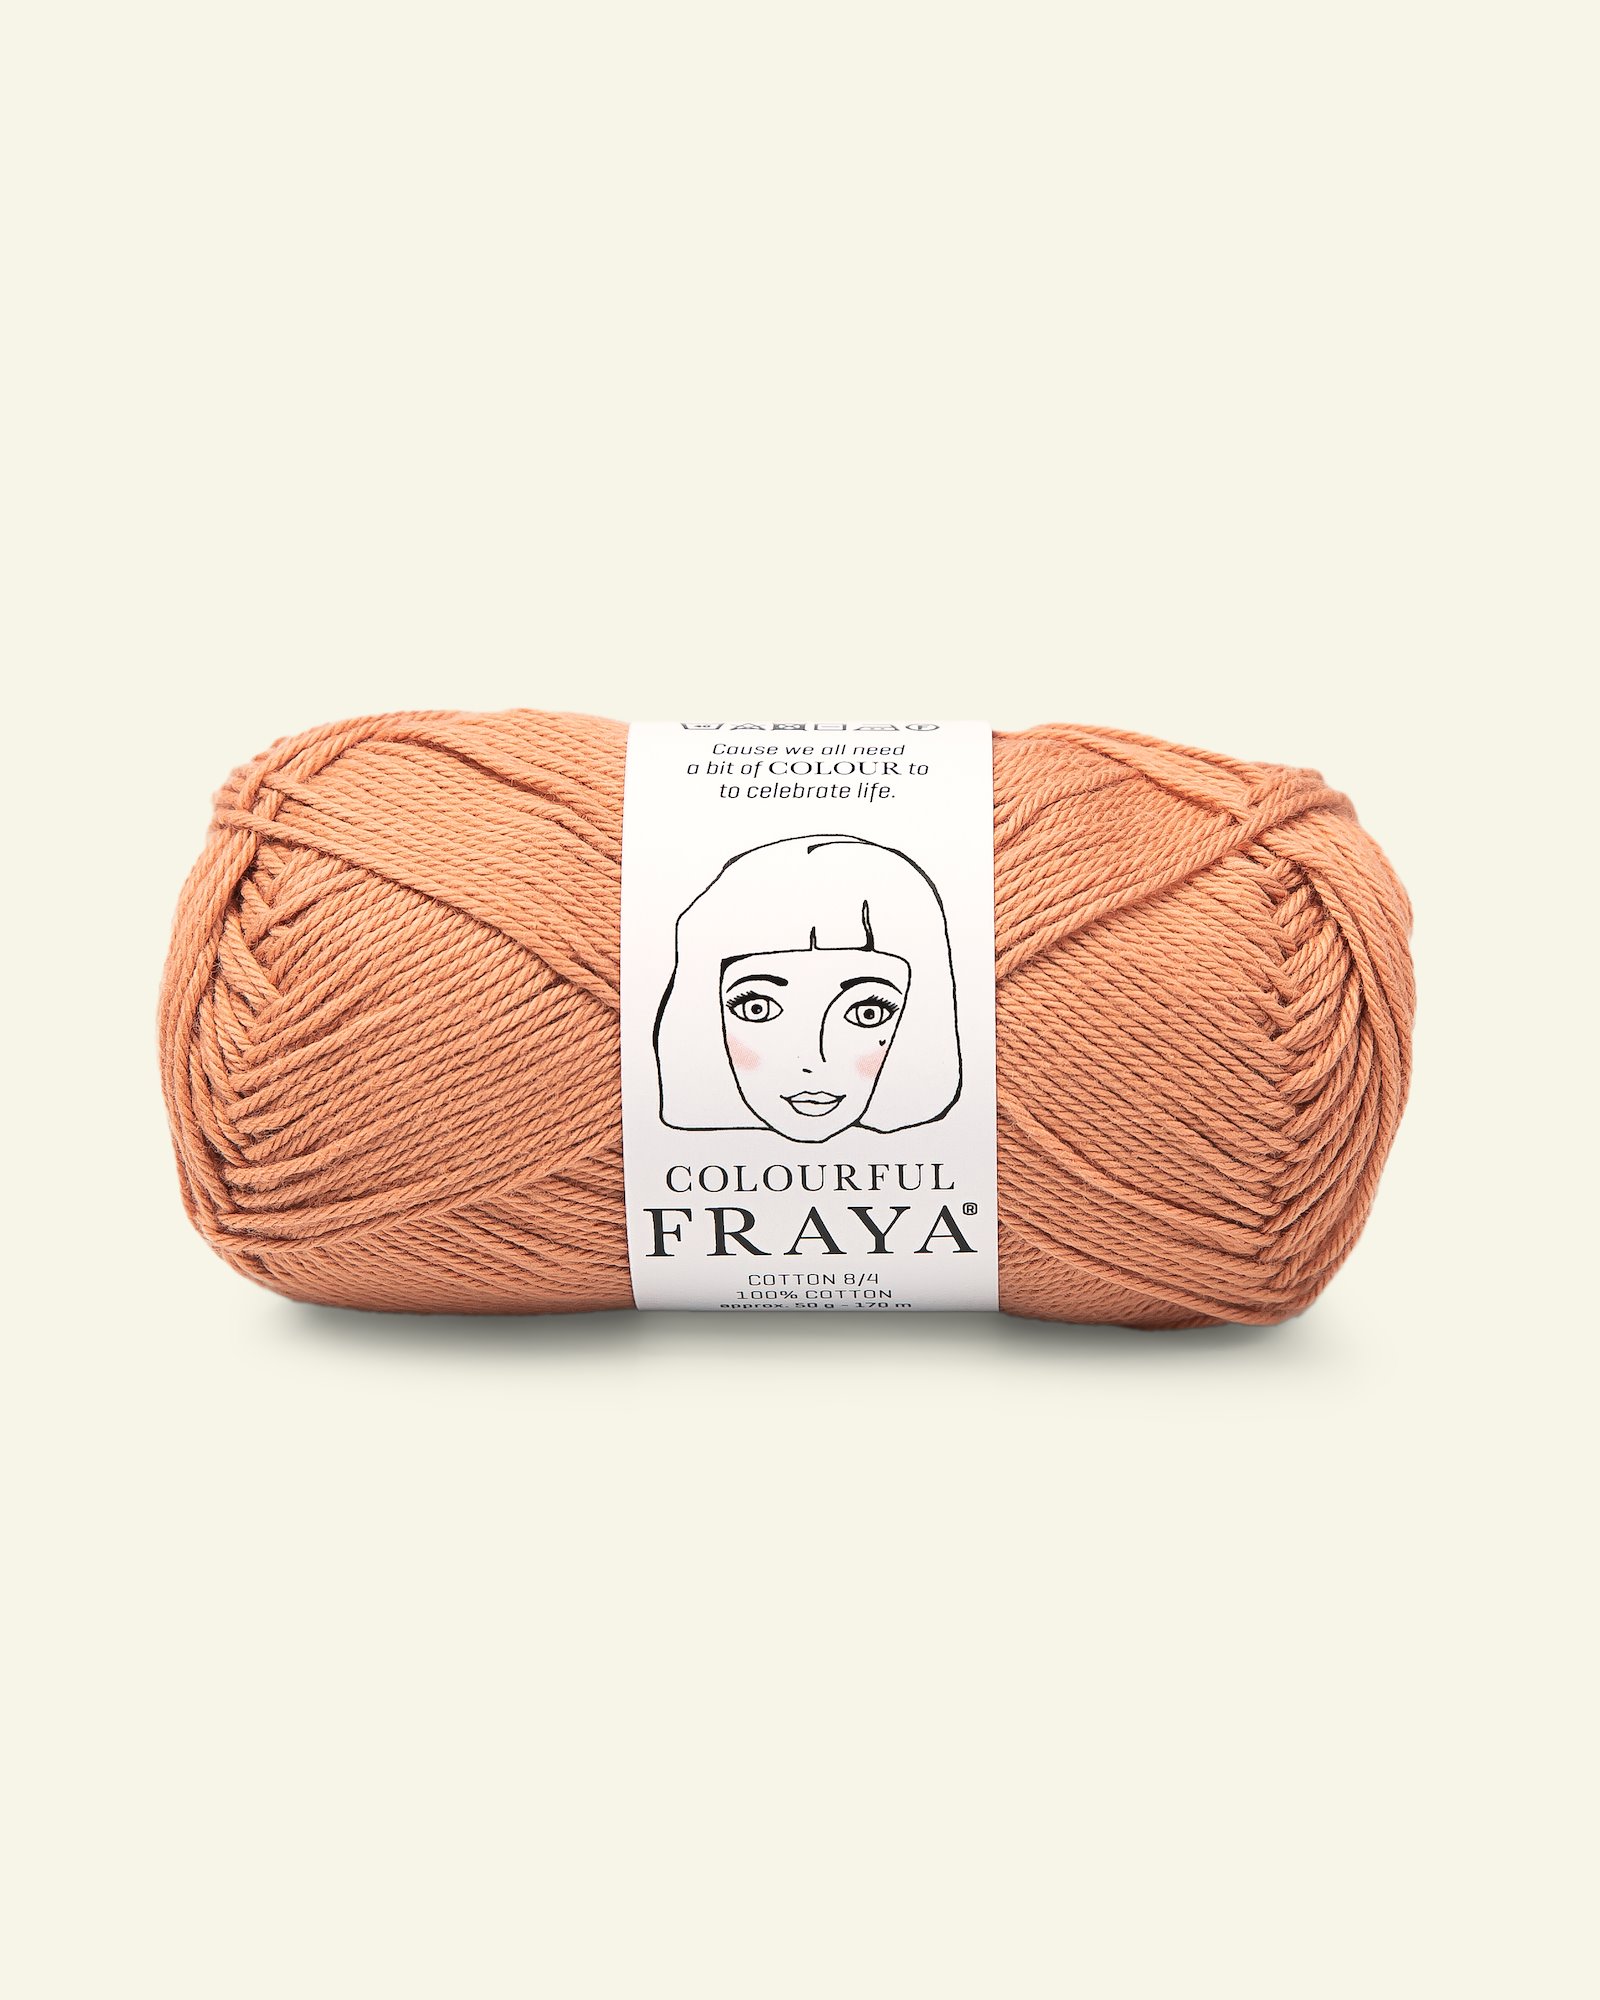 FRAYA, 100% Baumwolle, Cotton 8/4, "Colourful", Hell Terracotta 90060061_pack